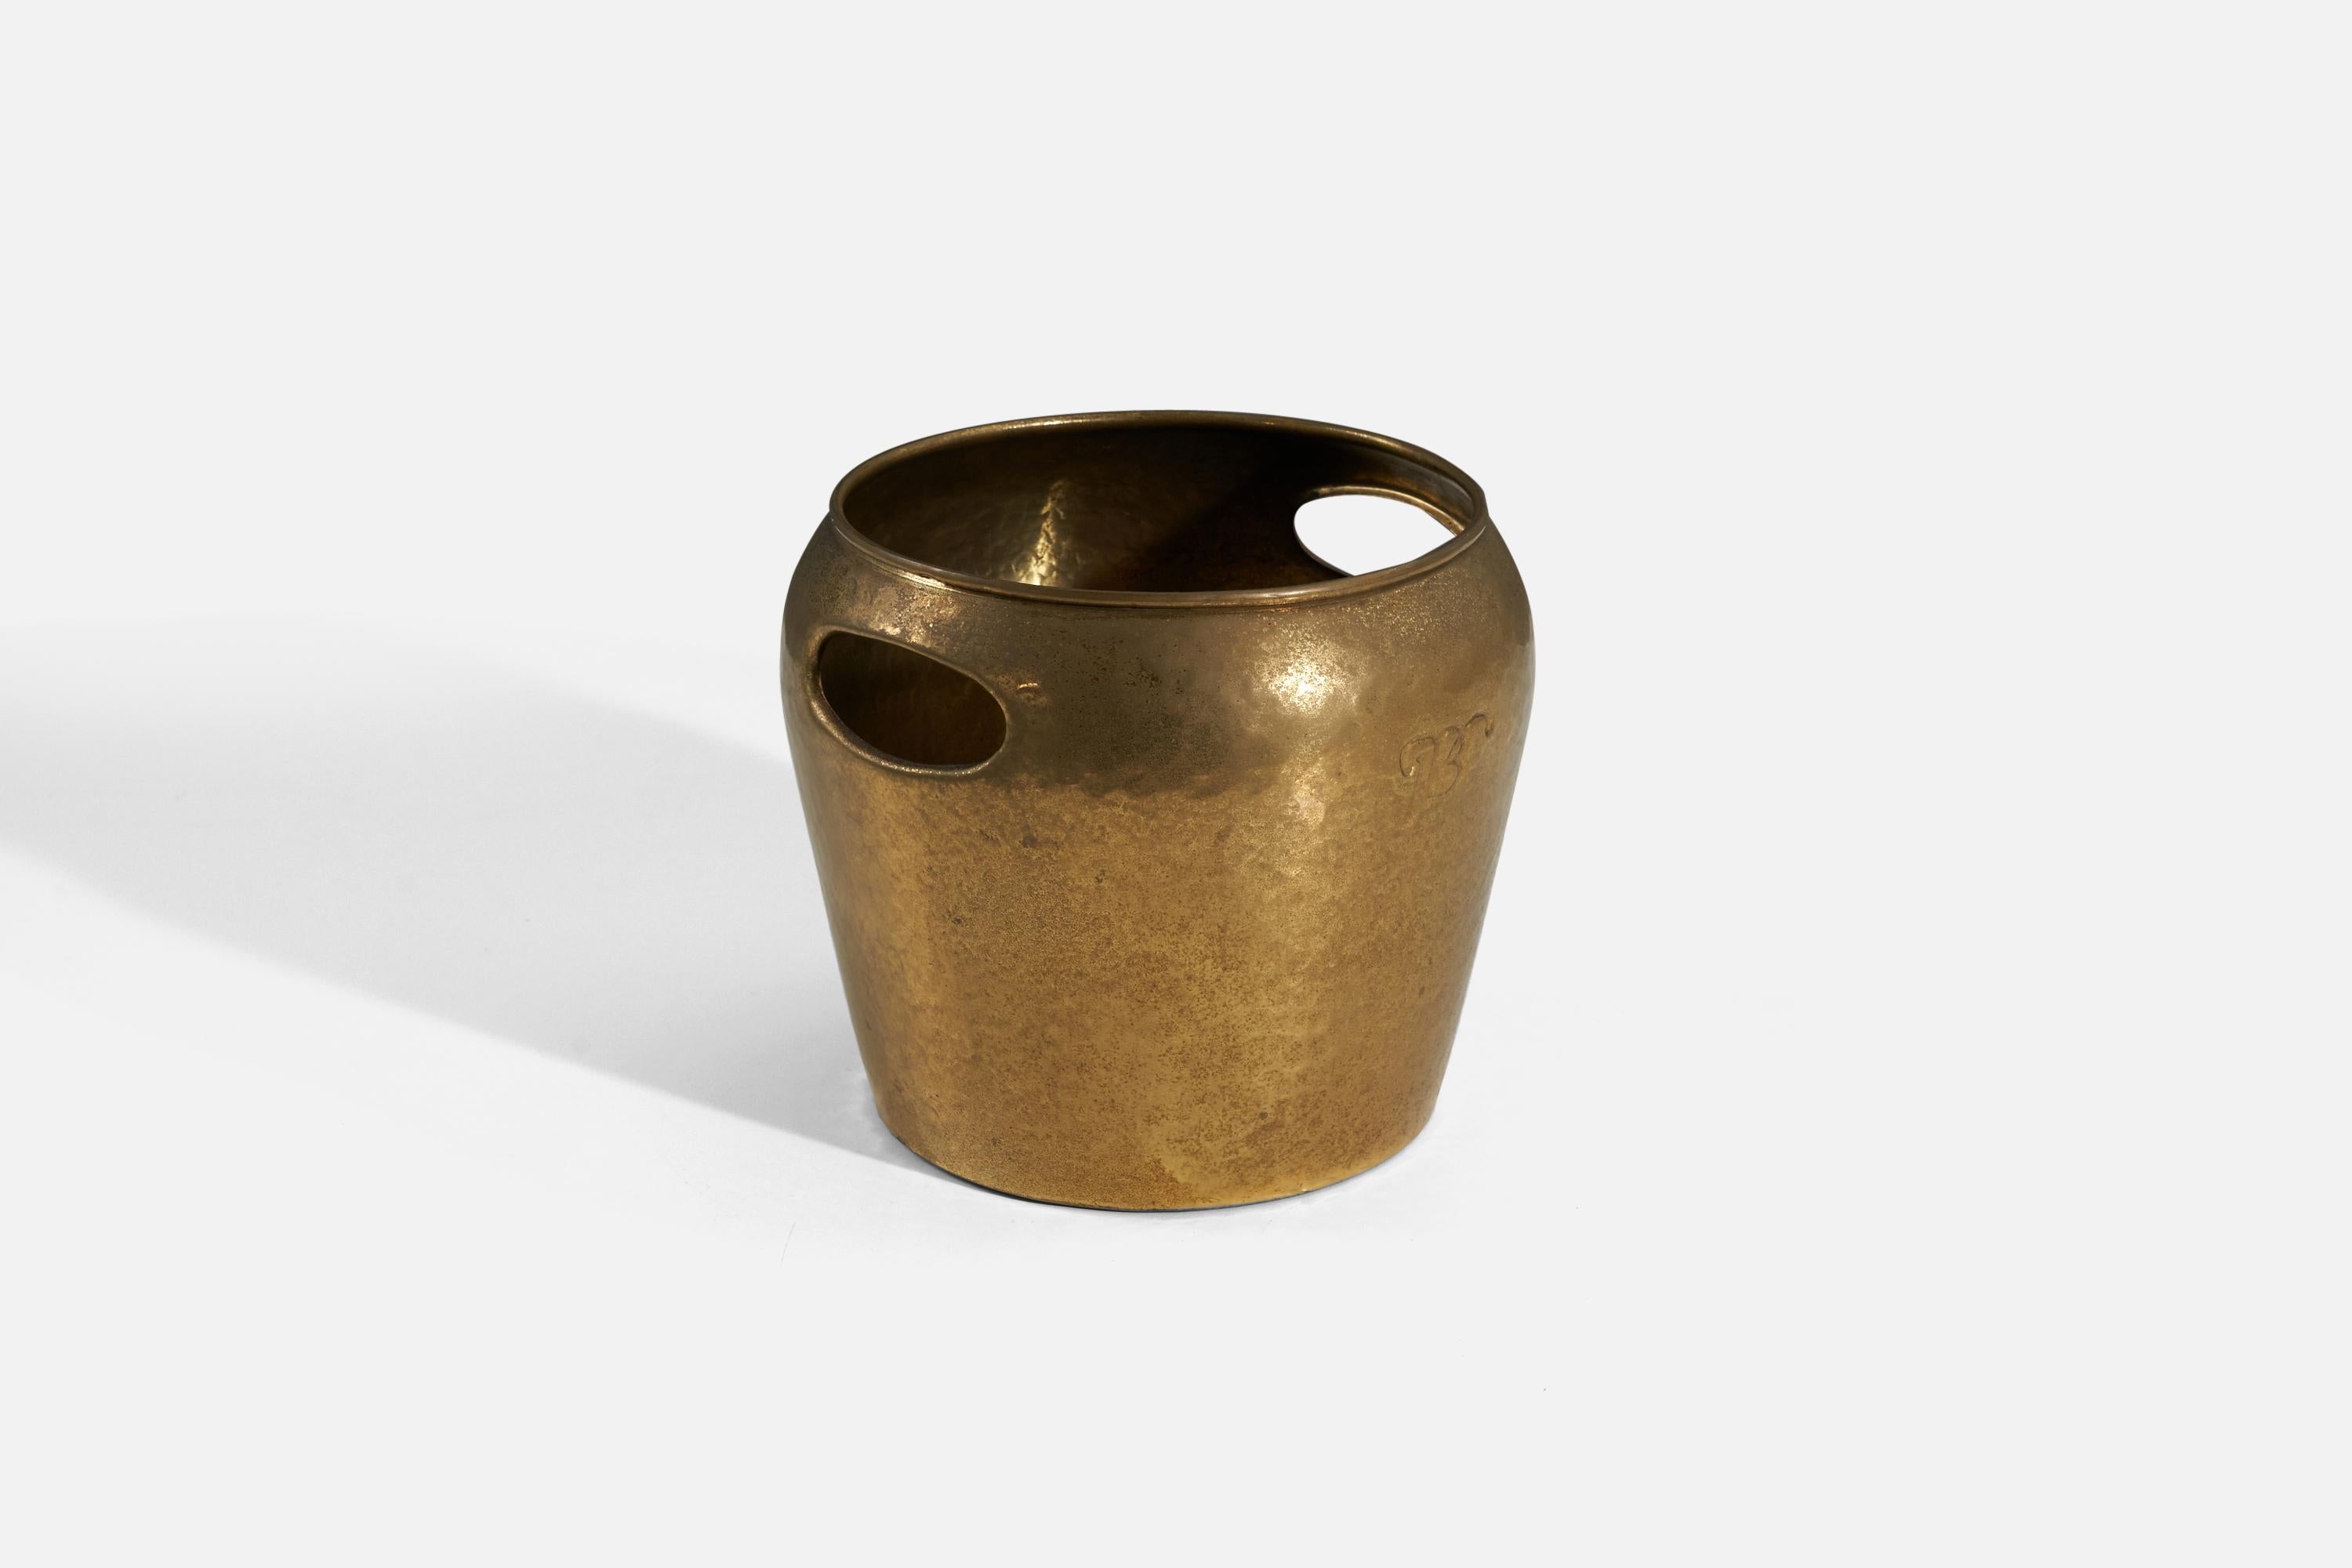 A hammered brass ice bucket designed and produced by an Italian designer, Italy, 1940s.